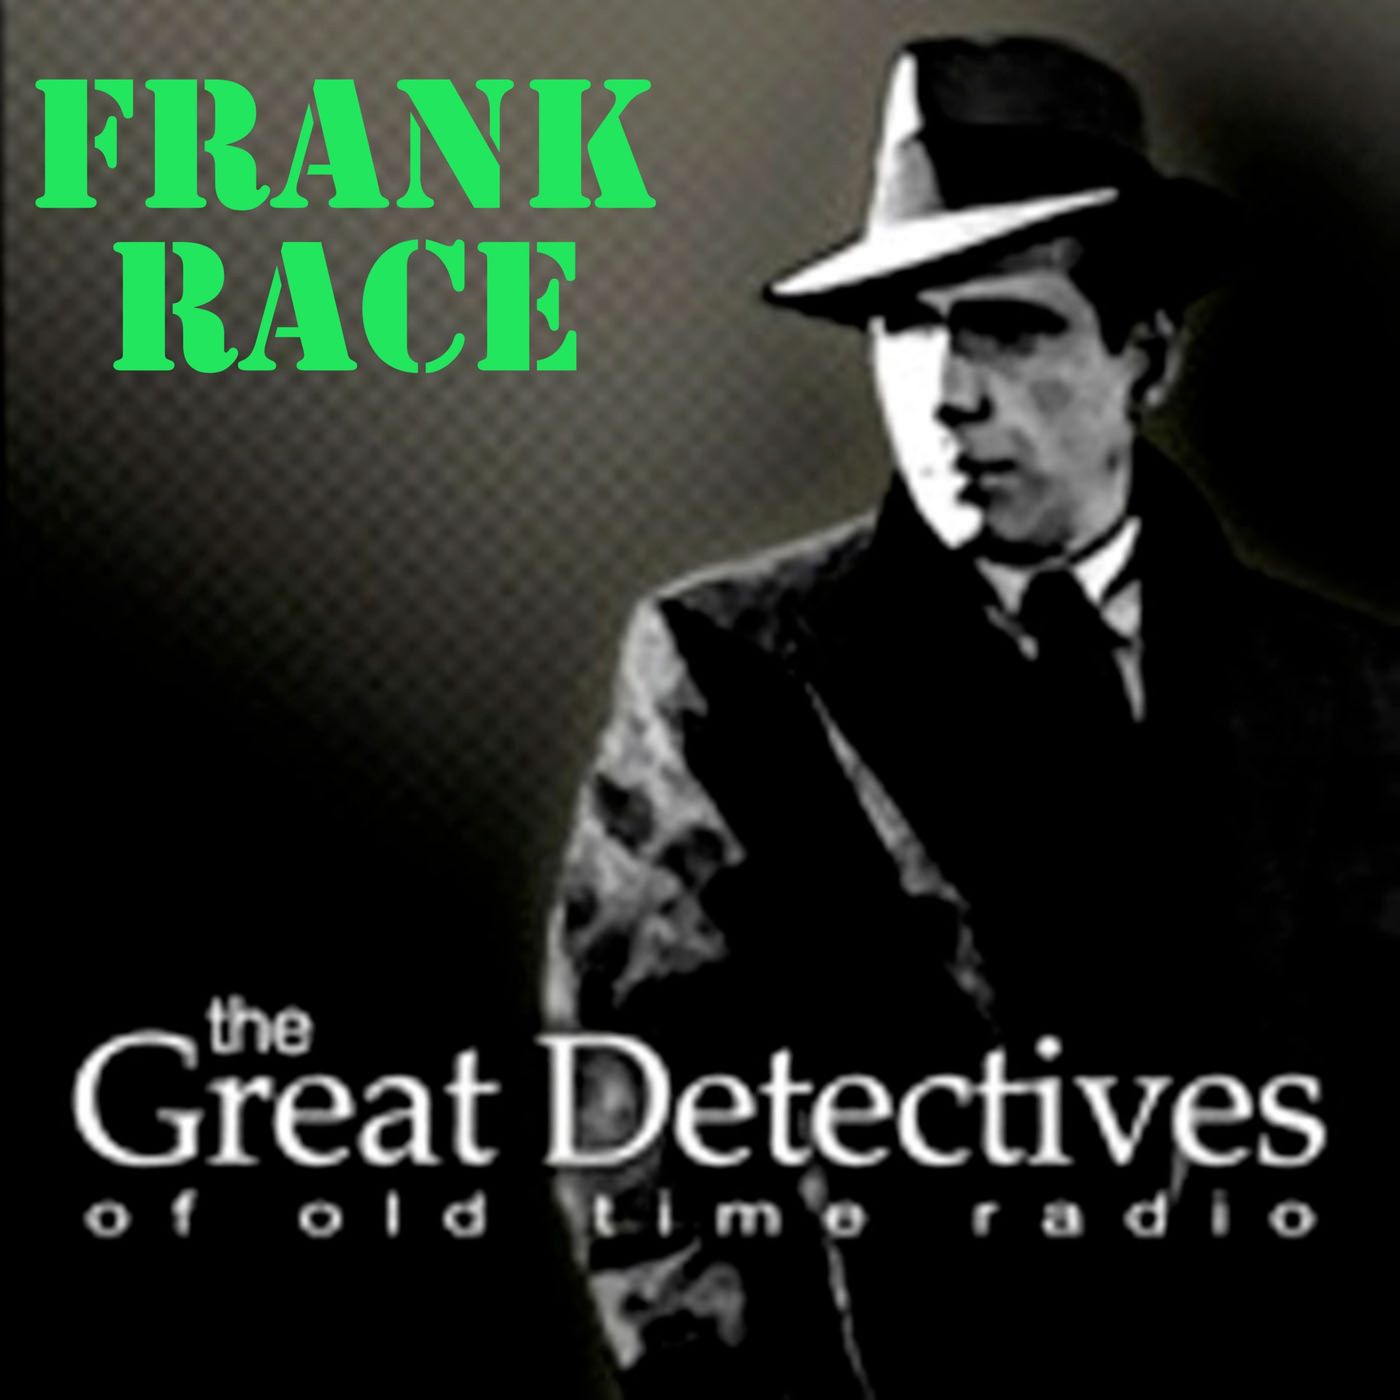 EP0928: Frank Race: The Adventure of the Kettle Drum